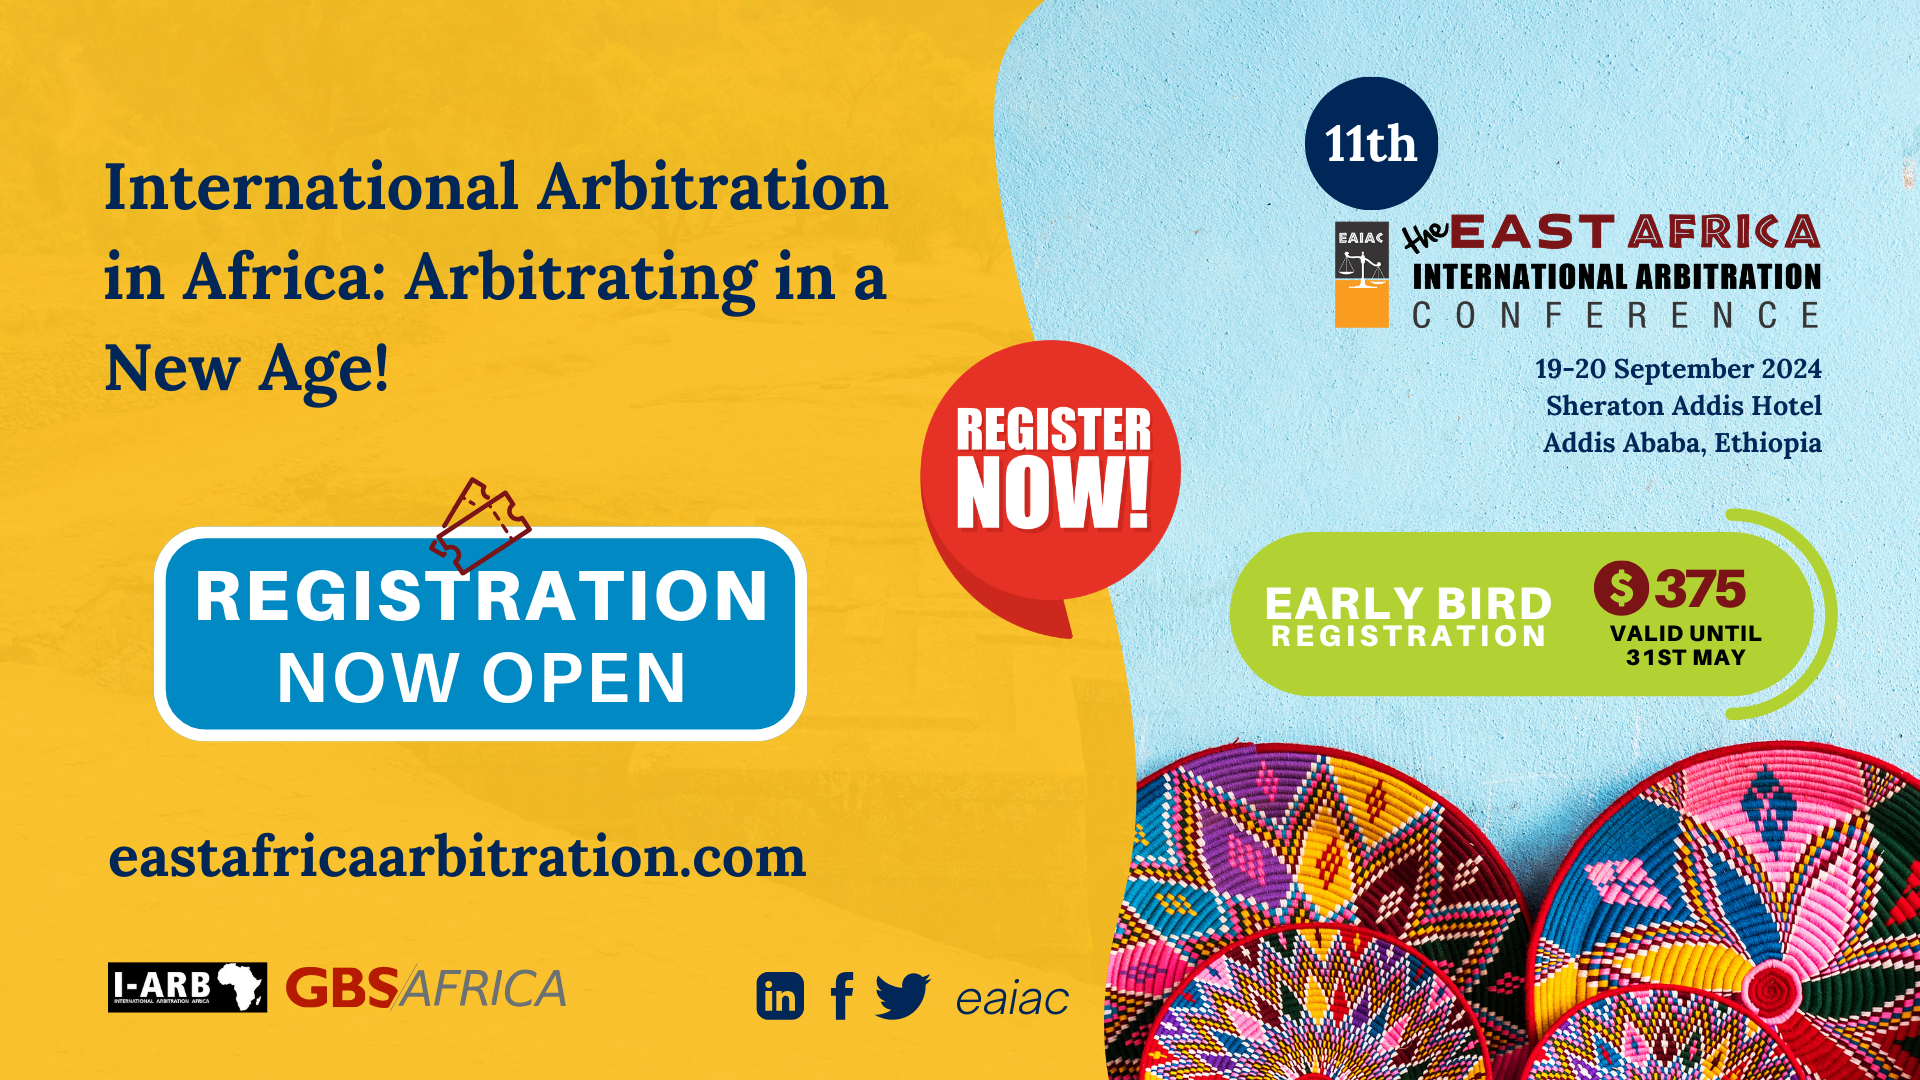 East Africa International Arbitration Conference 2024